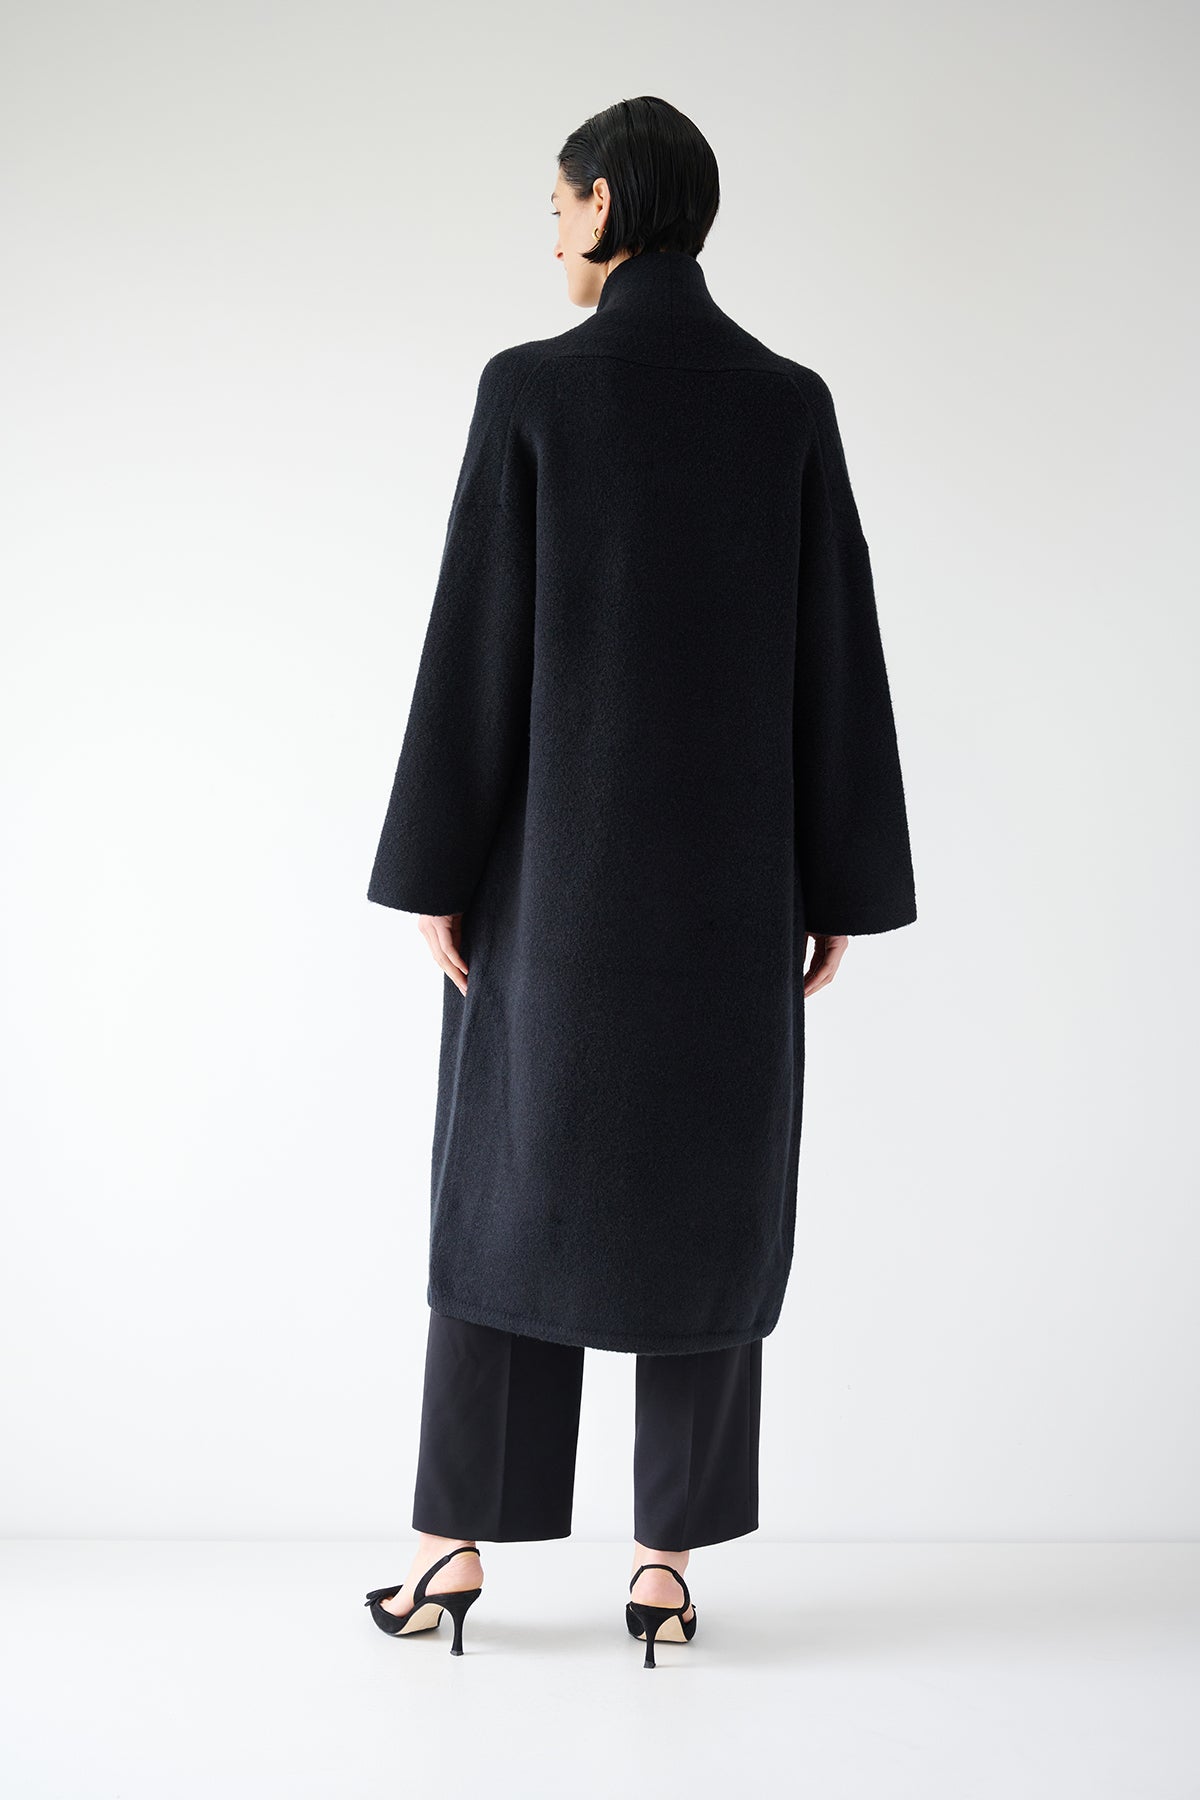 The back view of a woman wearing a CARMEL COAT by Velvet by Jenny Graham.-35547930427585